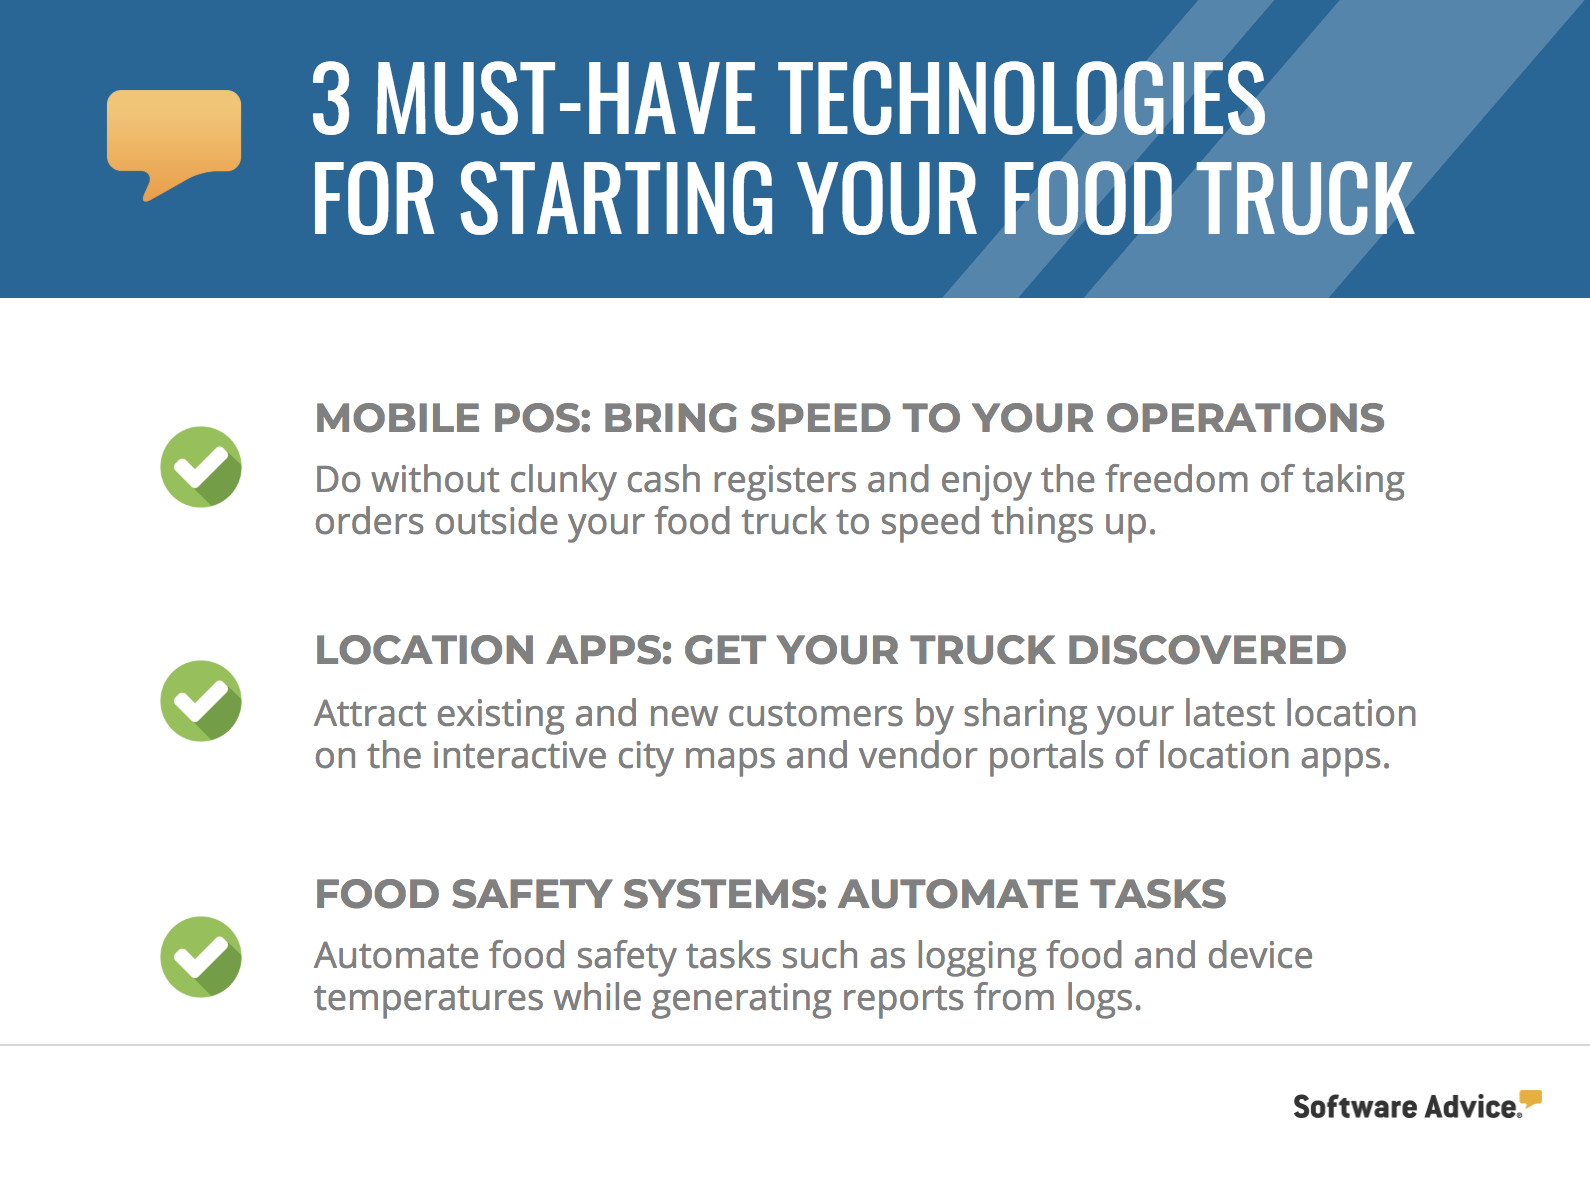 must-have-technologies-for-food-trucks